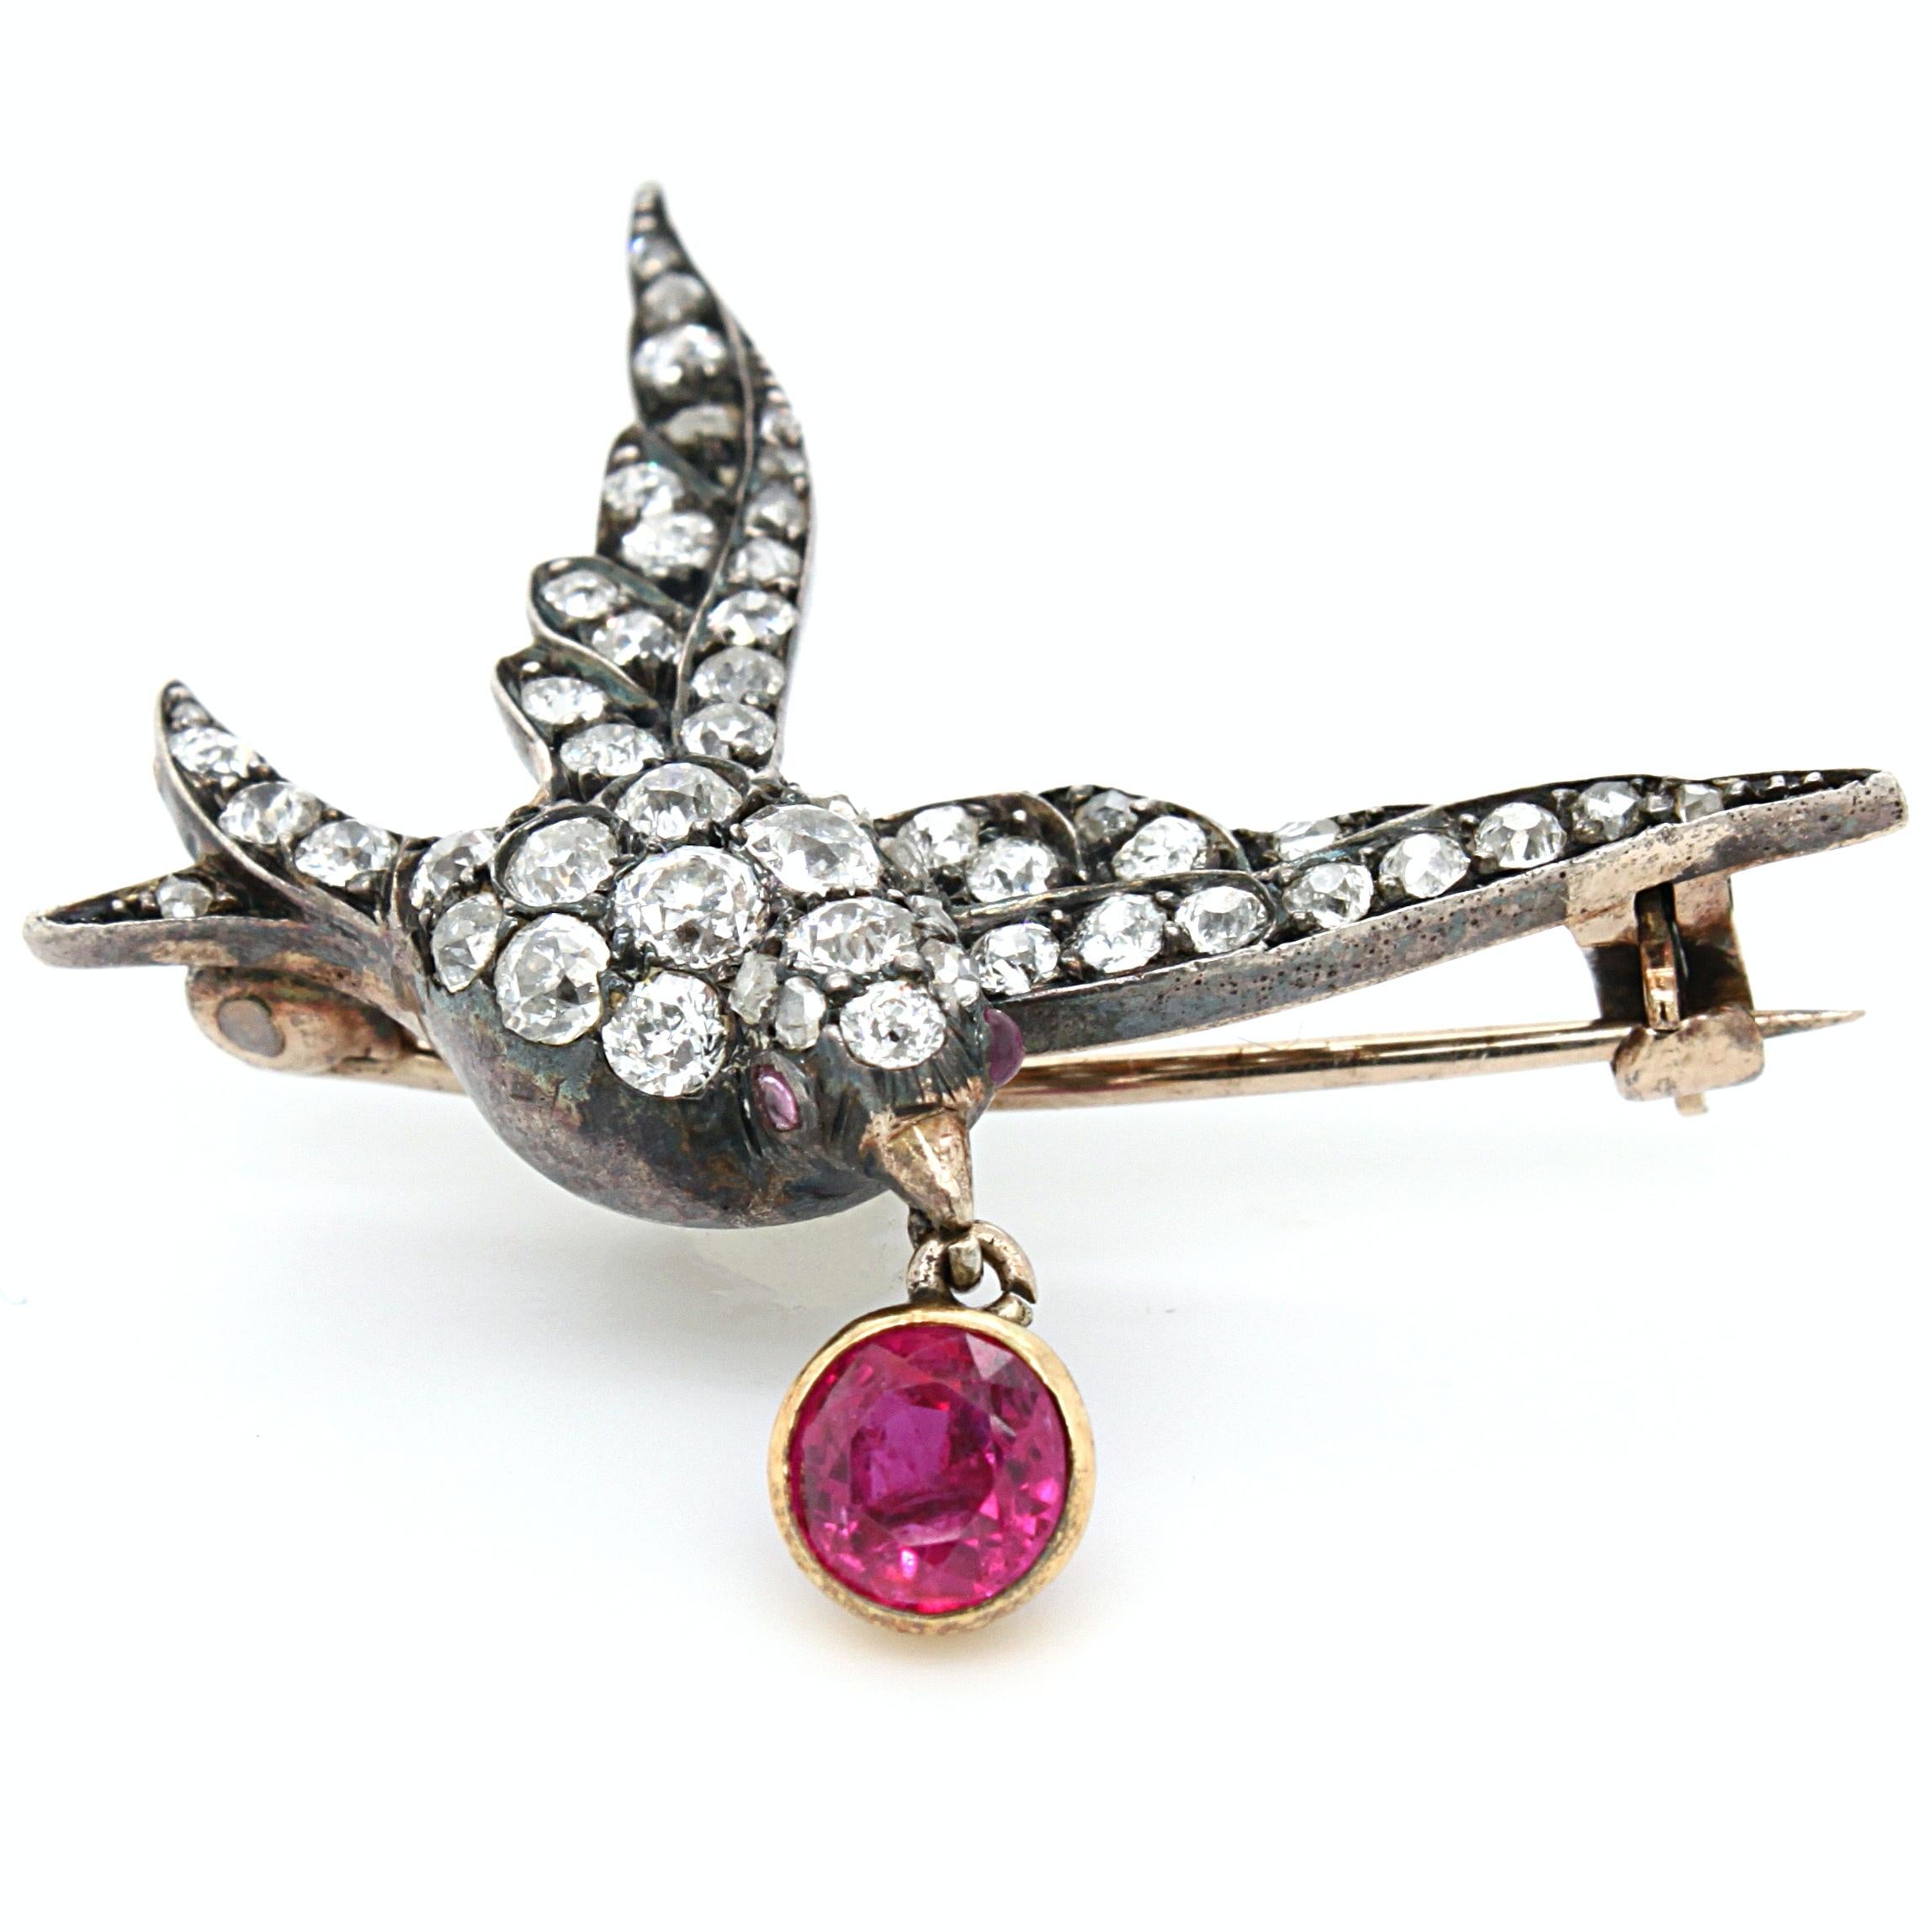 A beautiful diamond and ruby dove brooch, Victorian, ca. 1880s. The dove bird body is set with old cut diamonds of very fine quality, with the eyes set with ruby cabochons. From its beak hangs a facetted round shaped natural, not heated, ruby of